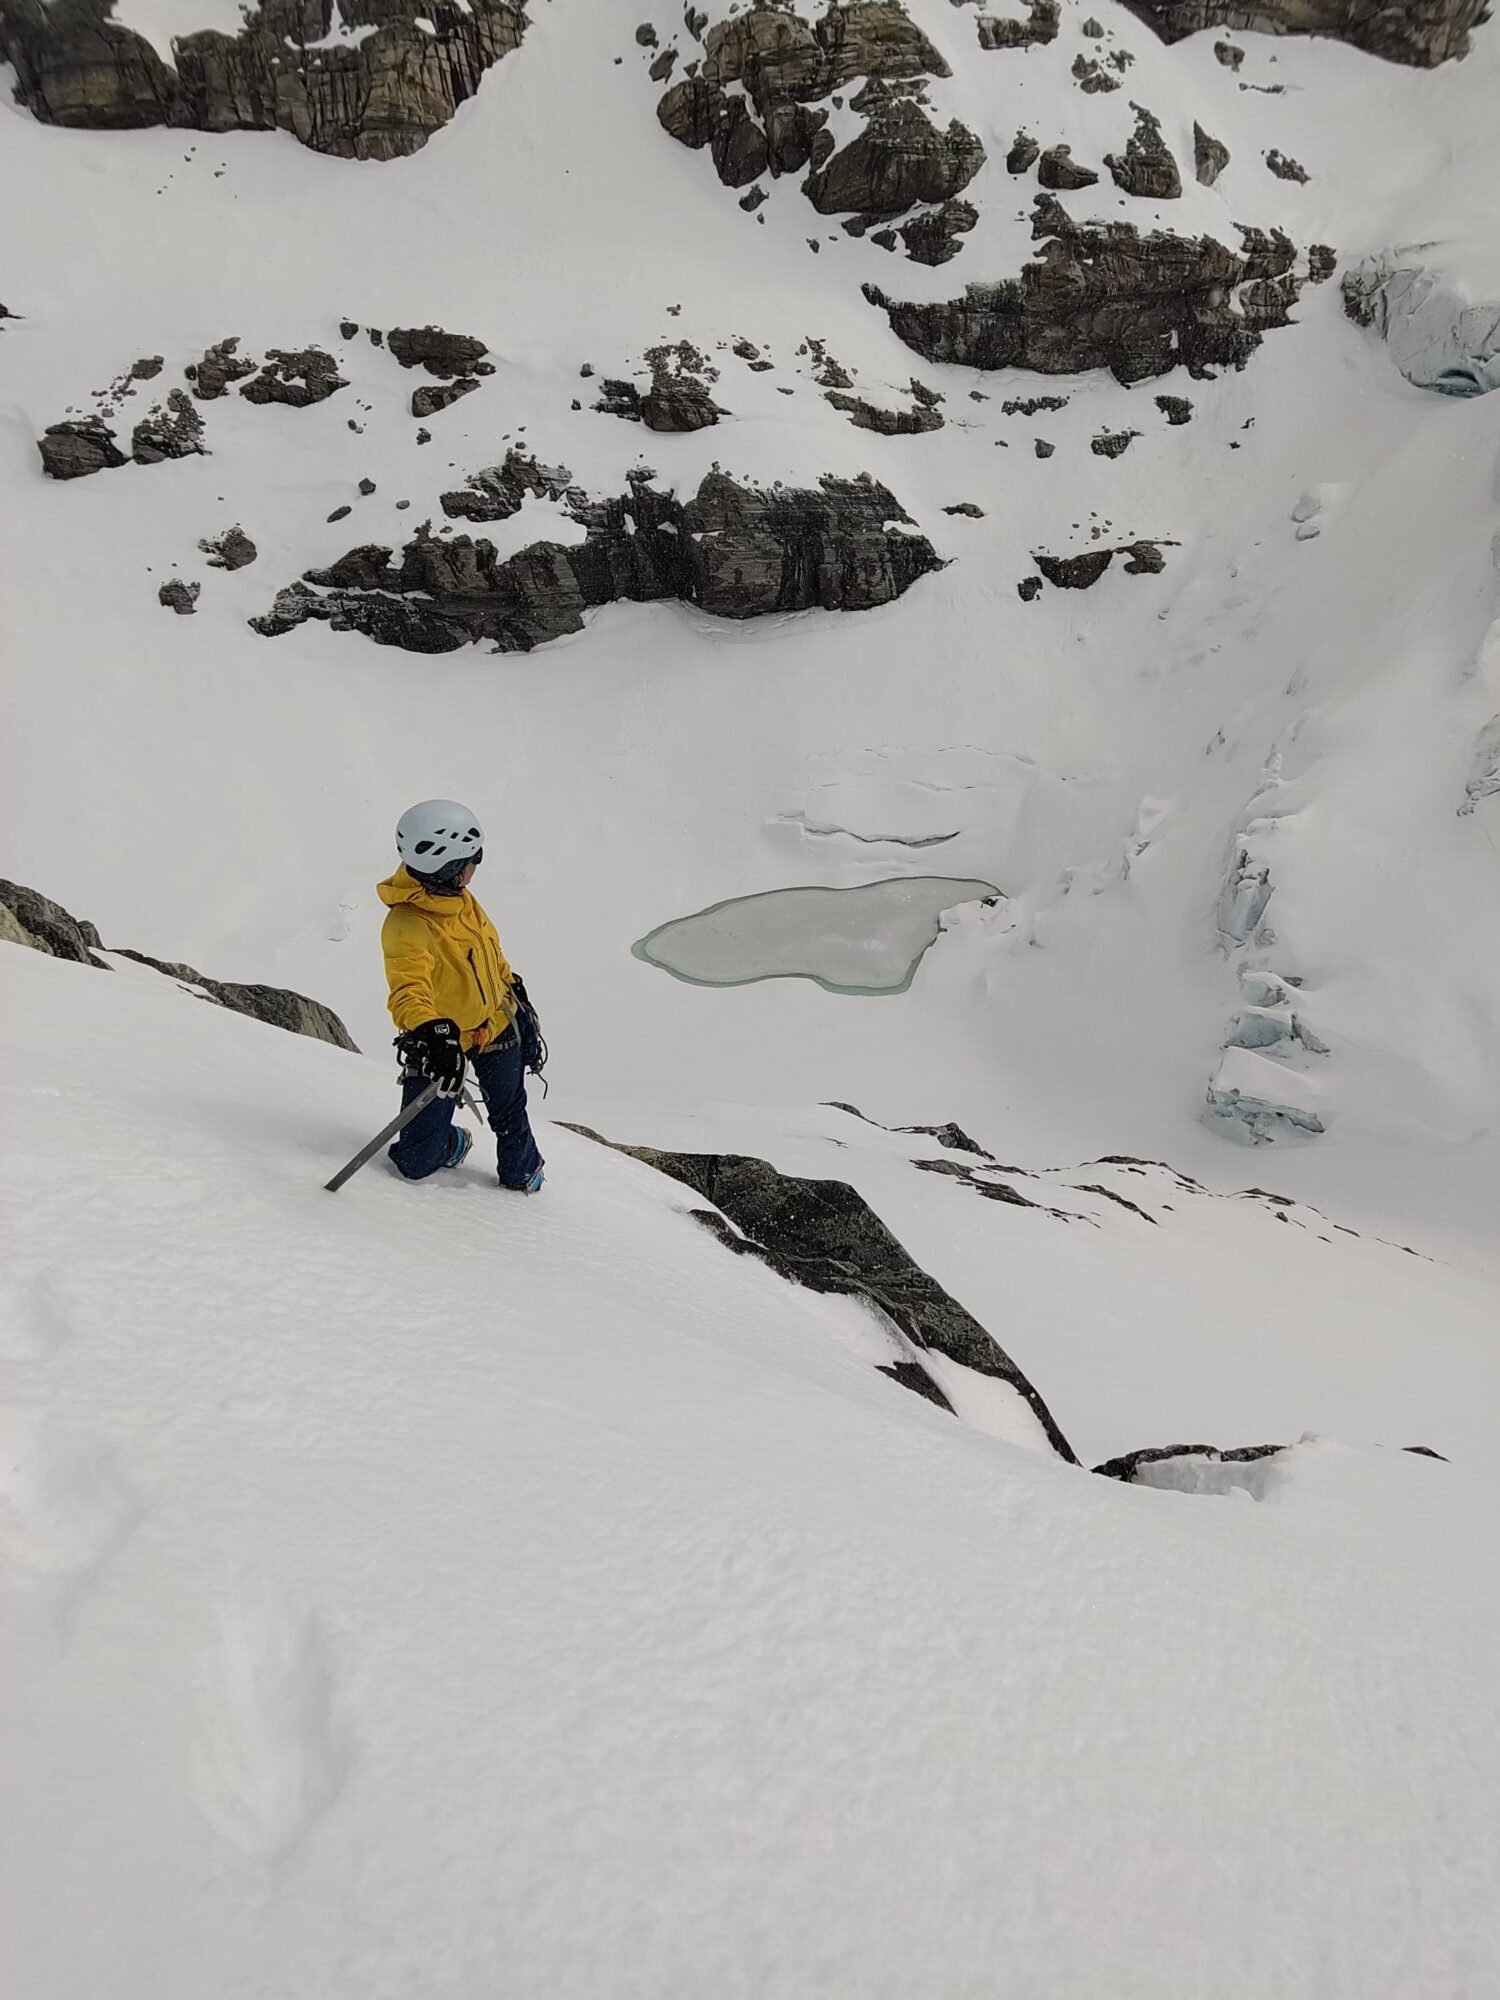 A group of researchers wants to help communities living close to melting glaciers. Photo shows scientists climbing up a glacier in winter.